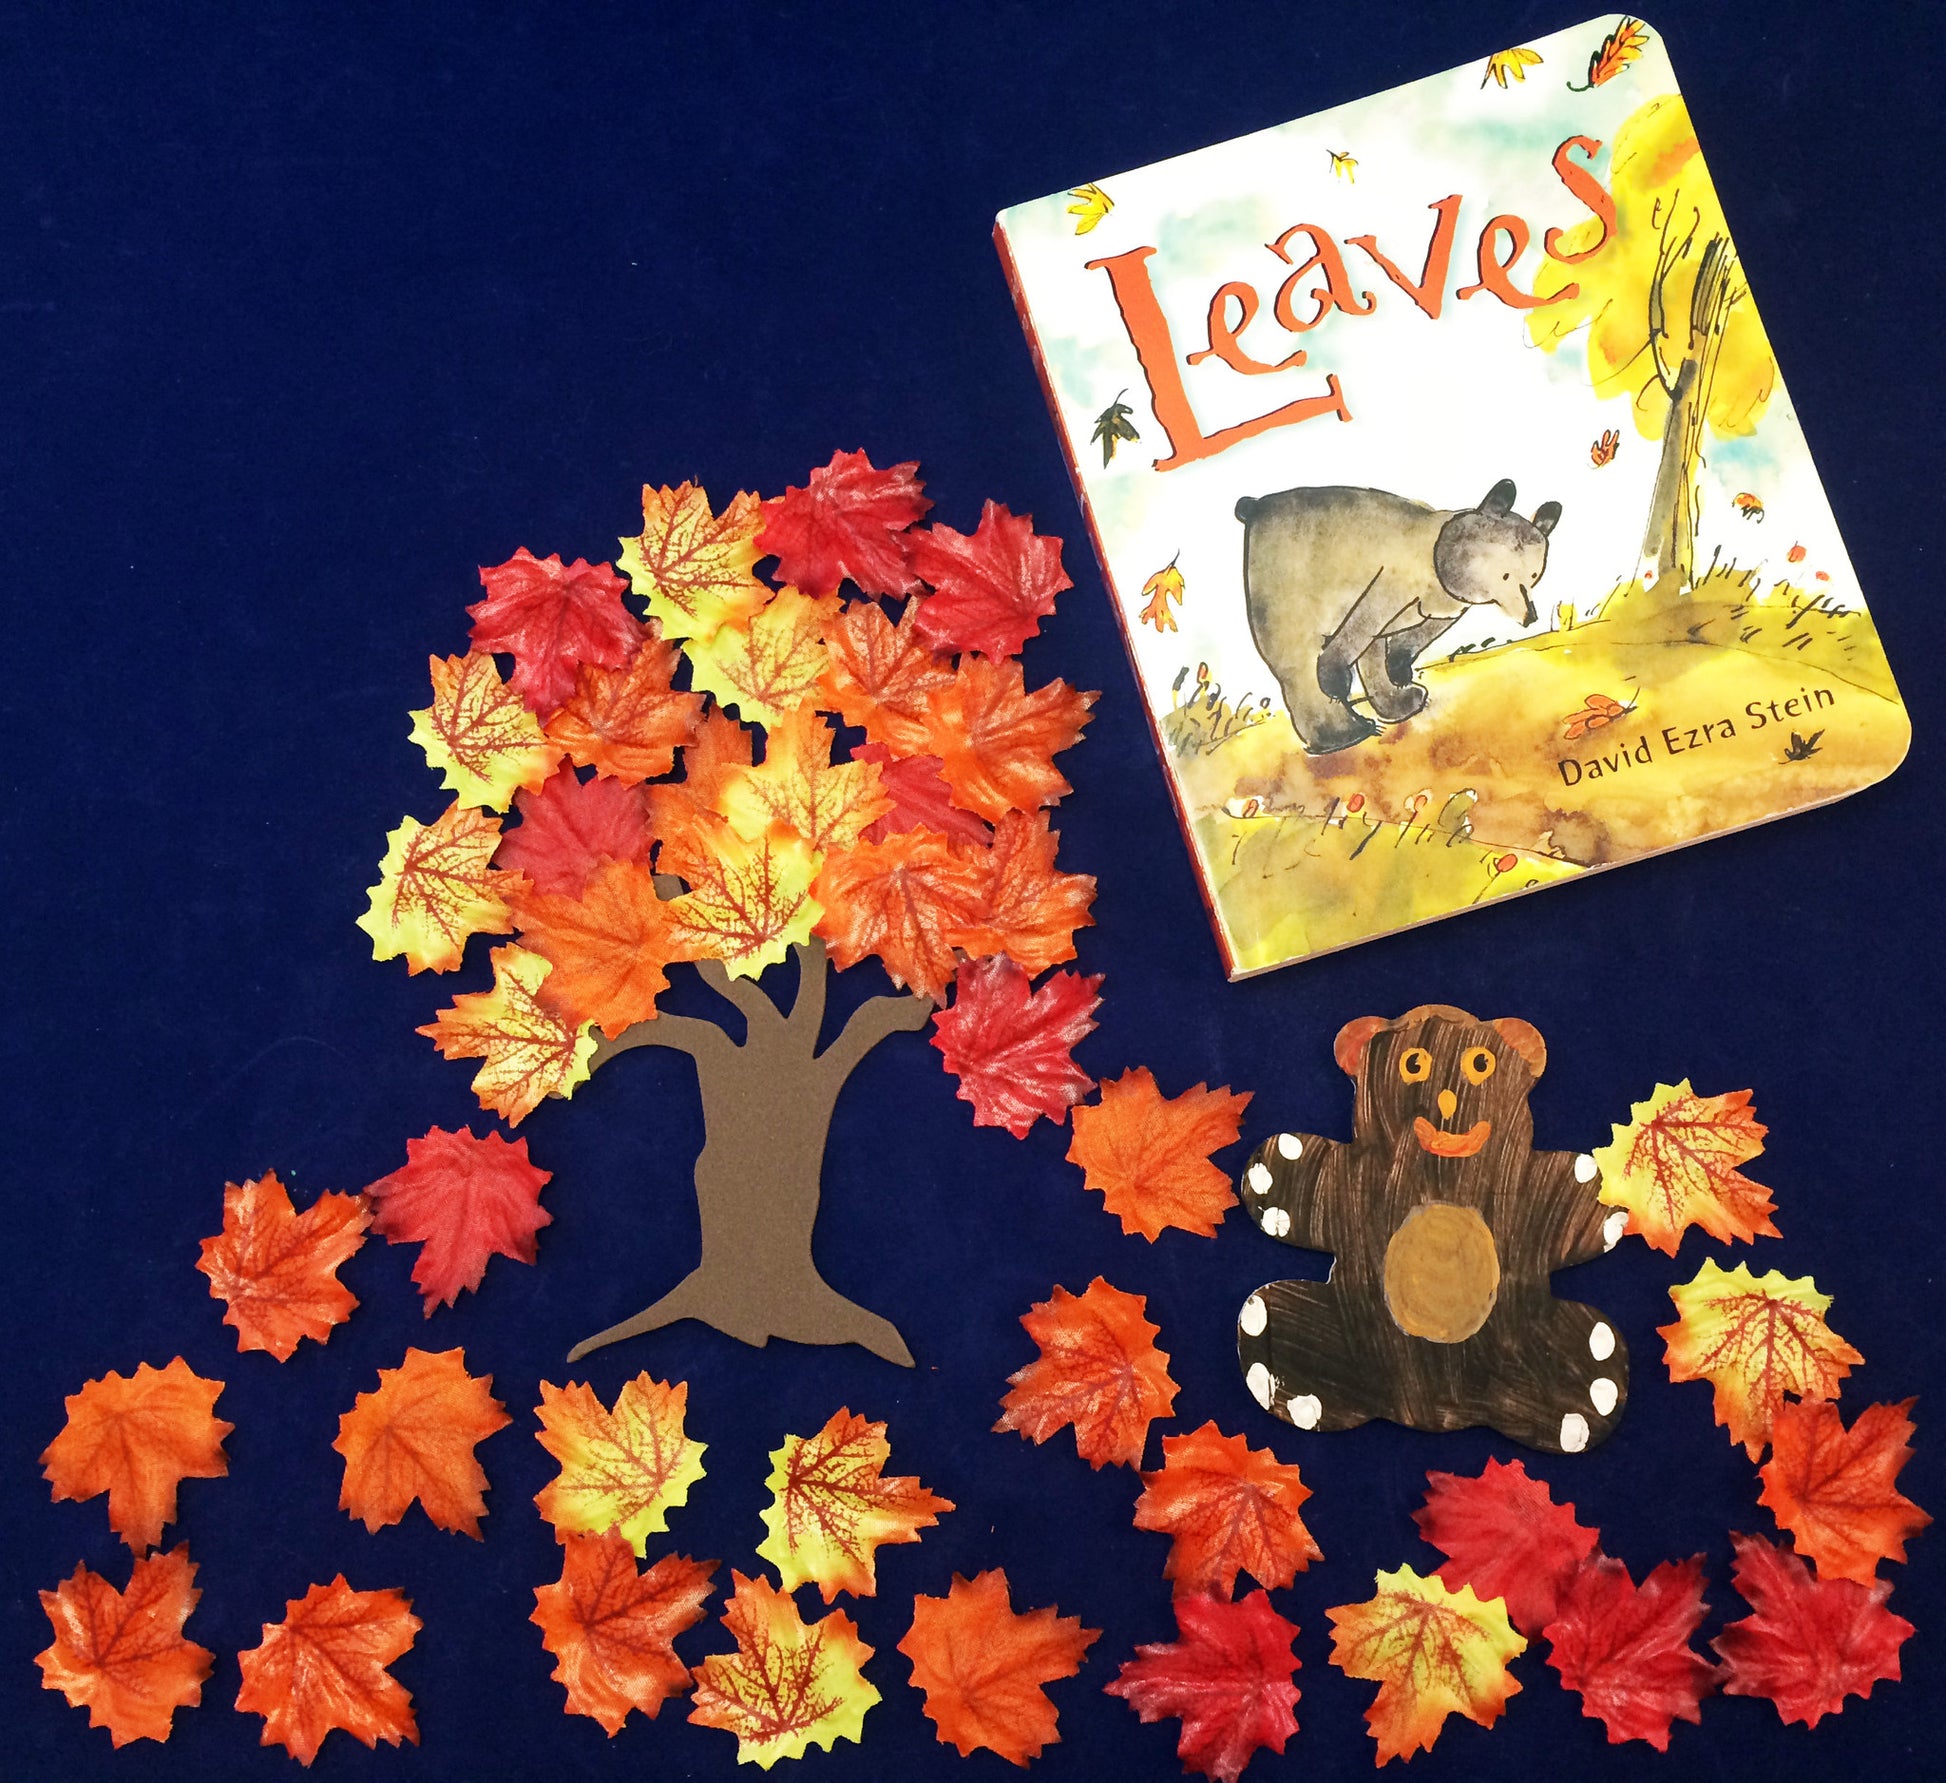 Retelling the story of Leaves by David Ezra Stein with silk leaves and foam trees